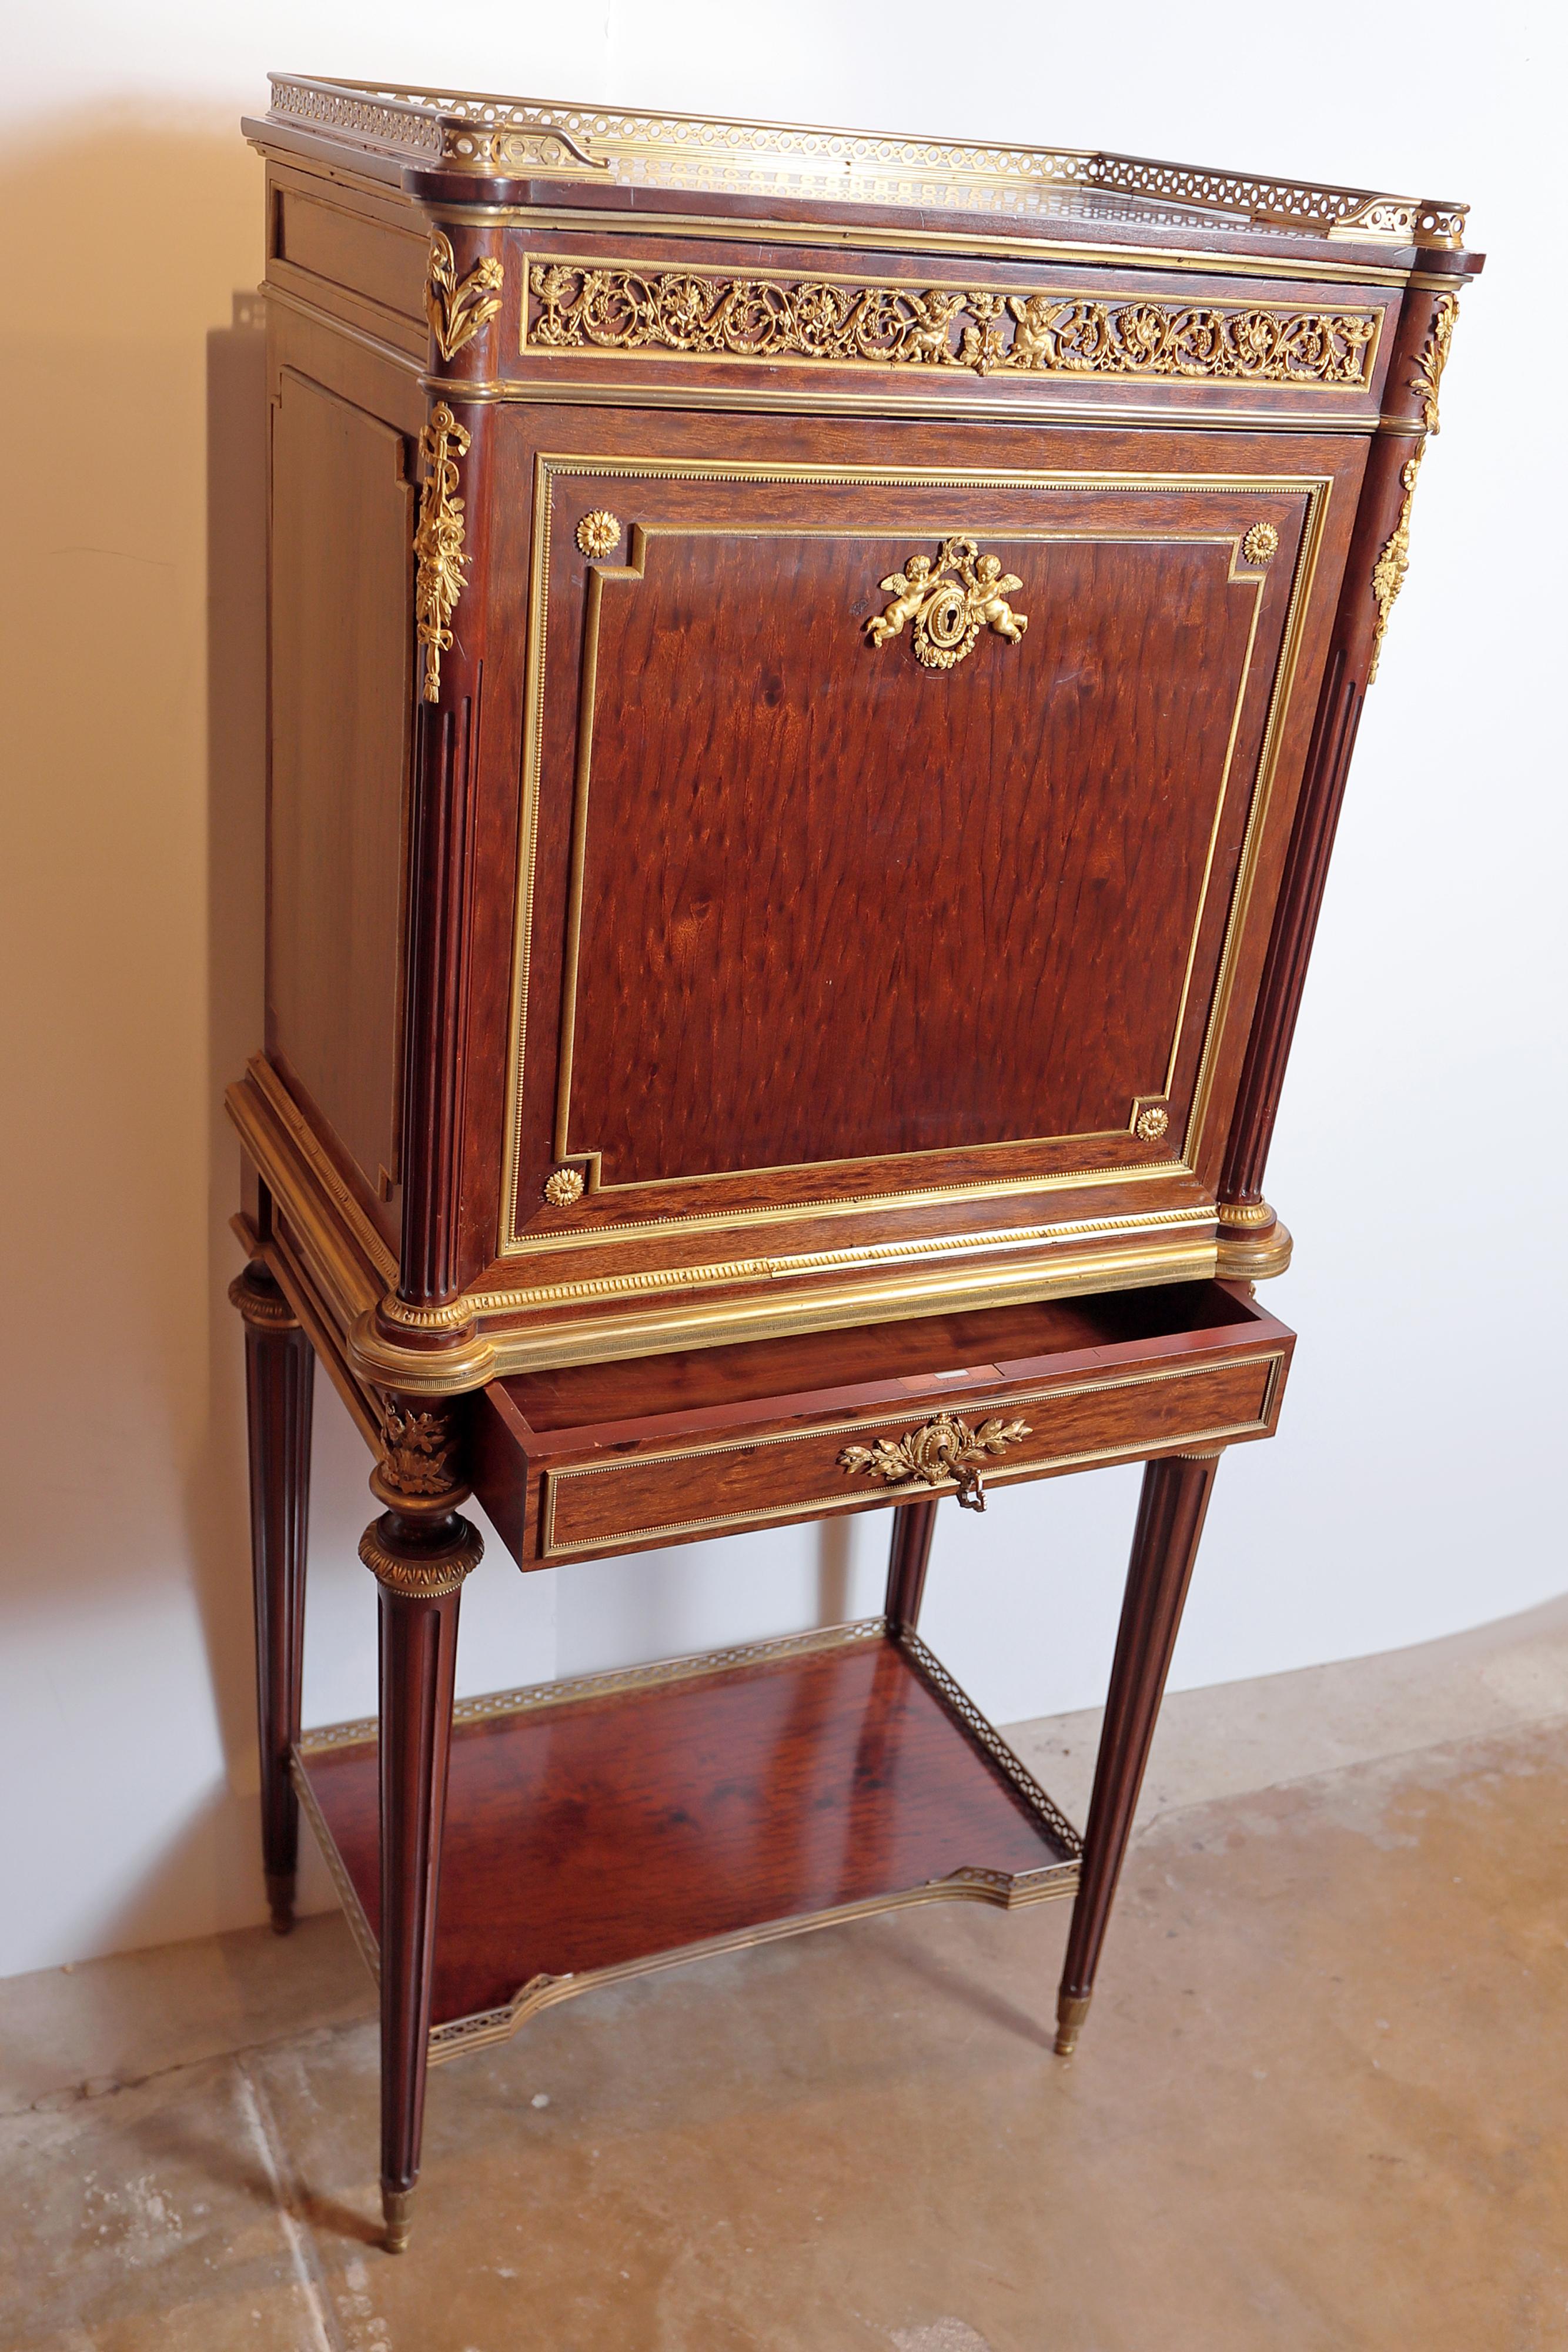 Late 19th century the rectangular three-quarter galleried top with eared corners above the conforming case fitted with a fall-front opening to gilt and tooled leather-inset writing surface and five shelves, further over a drawer, the lock plate